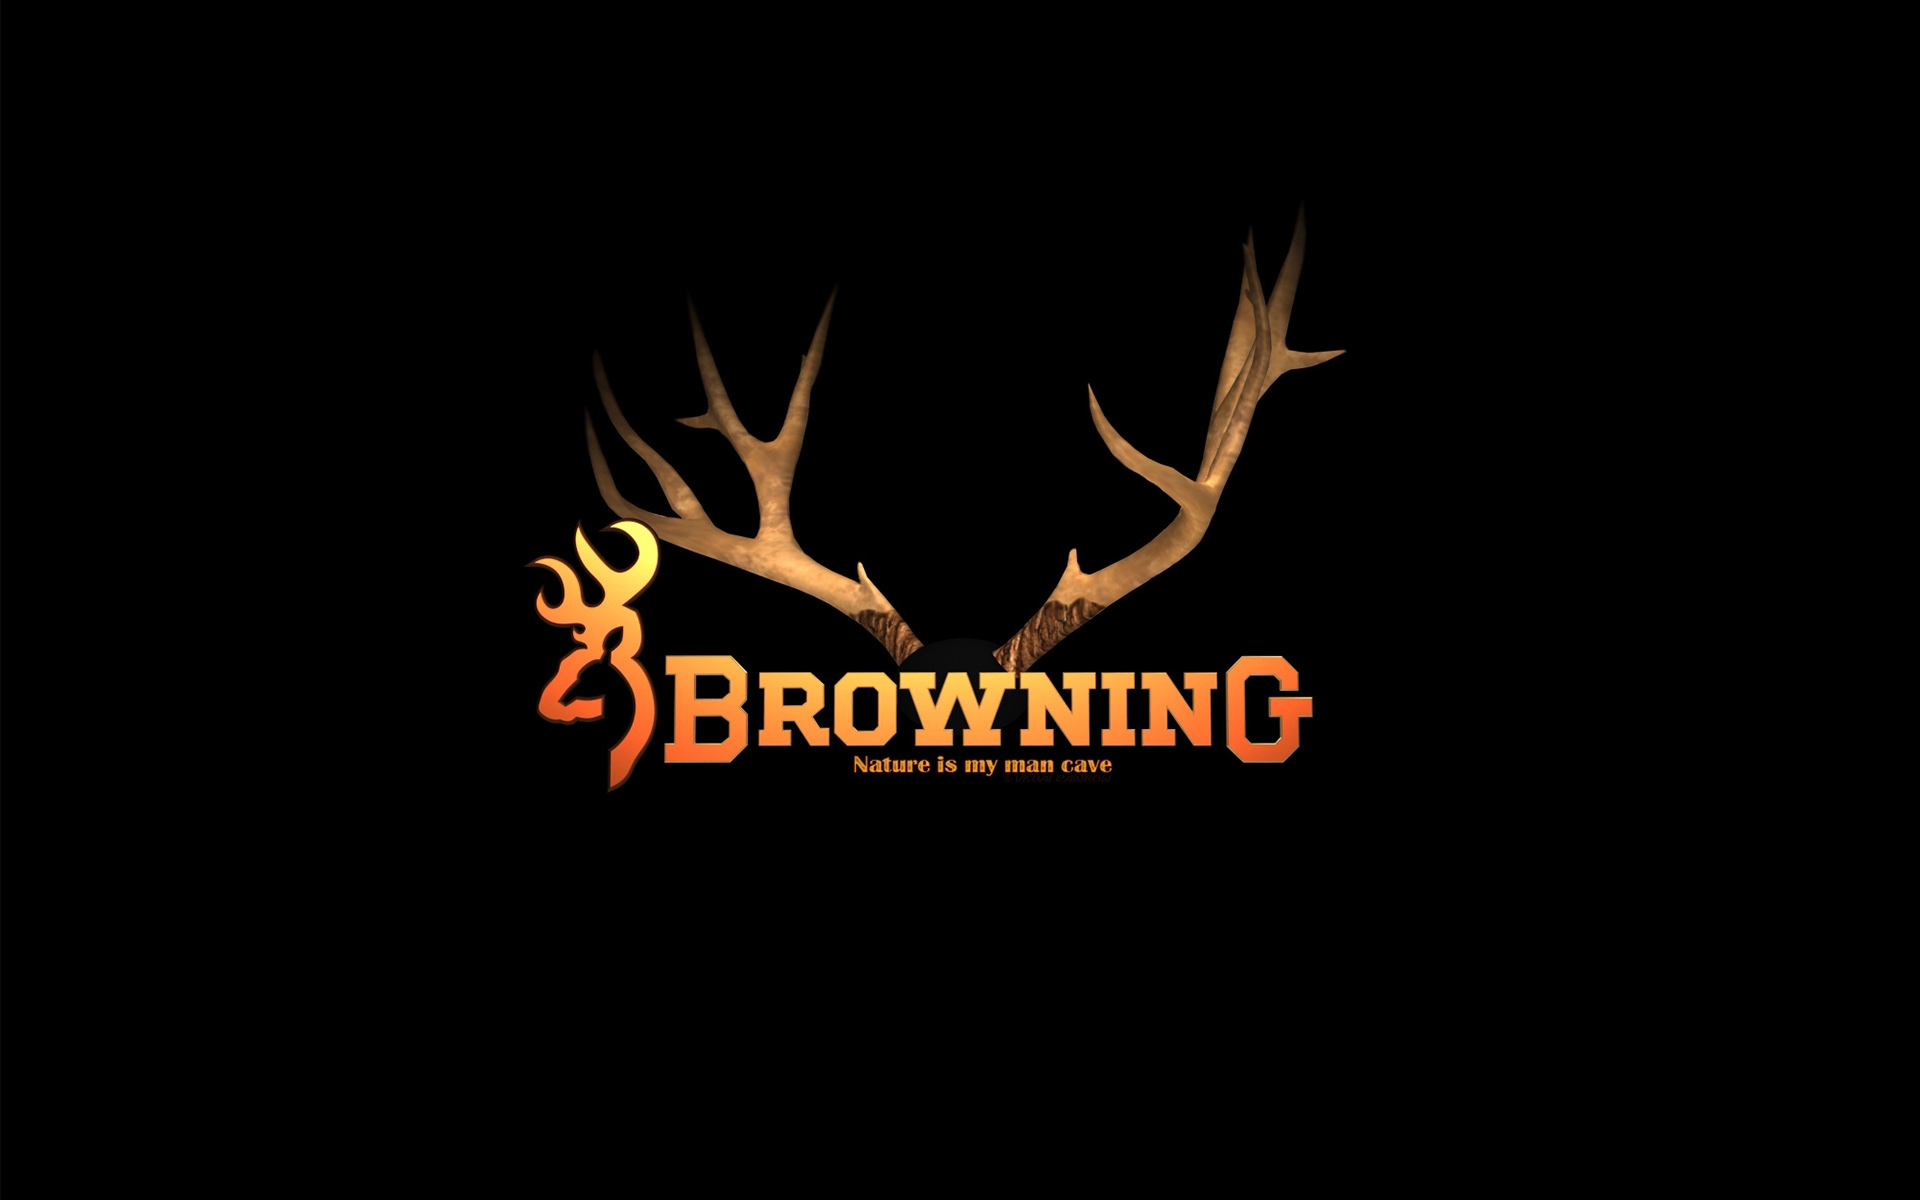 Browning Logo Background For iPhone Wallpaper